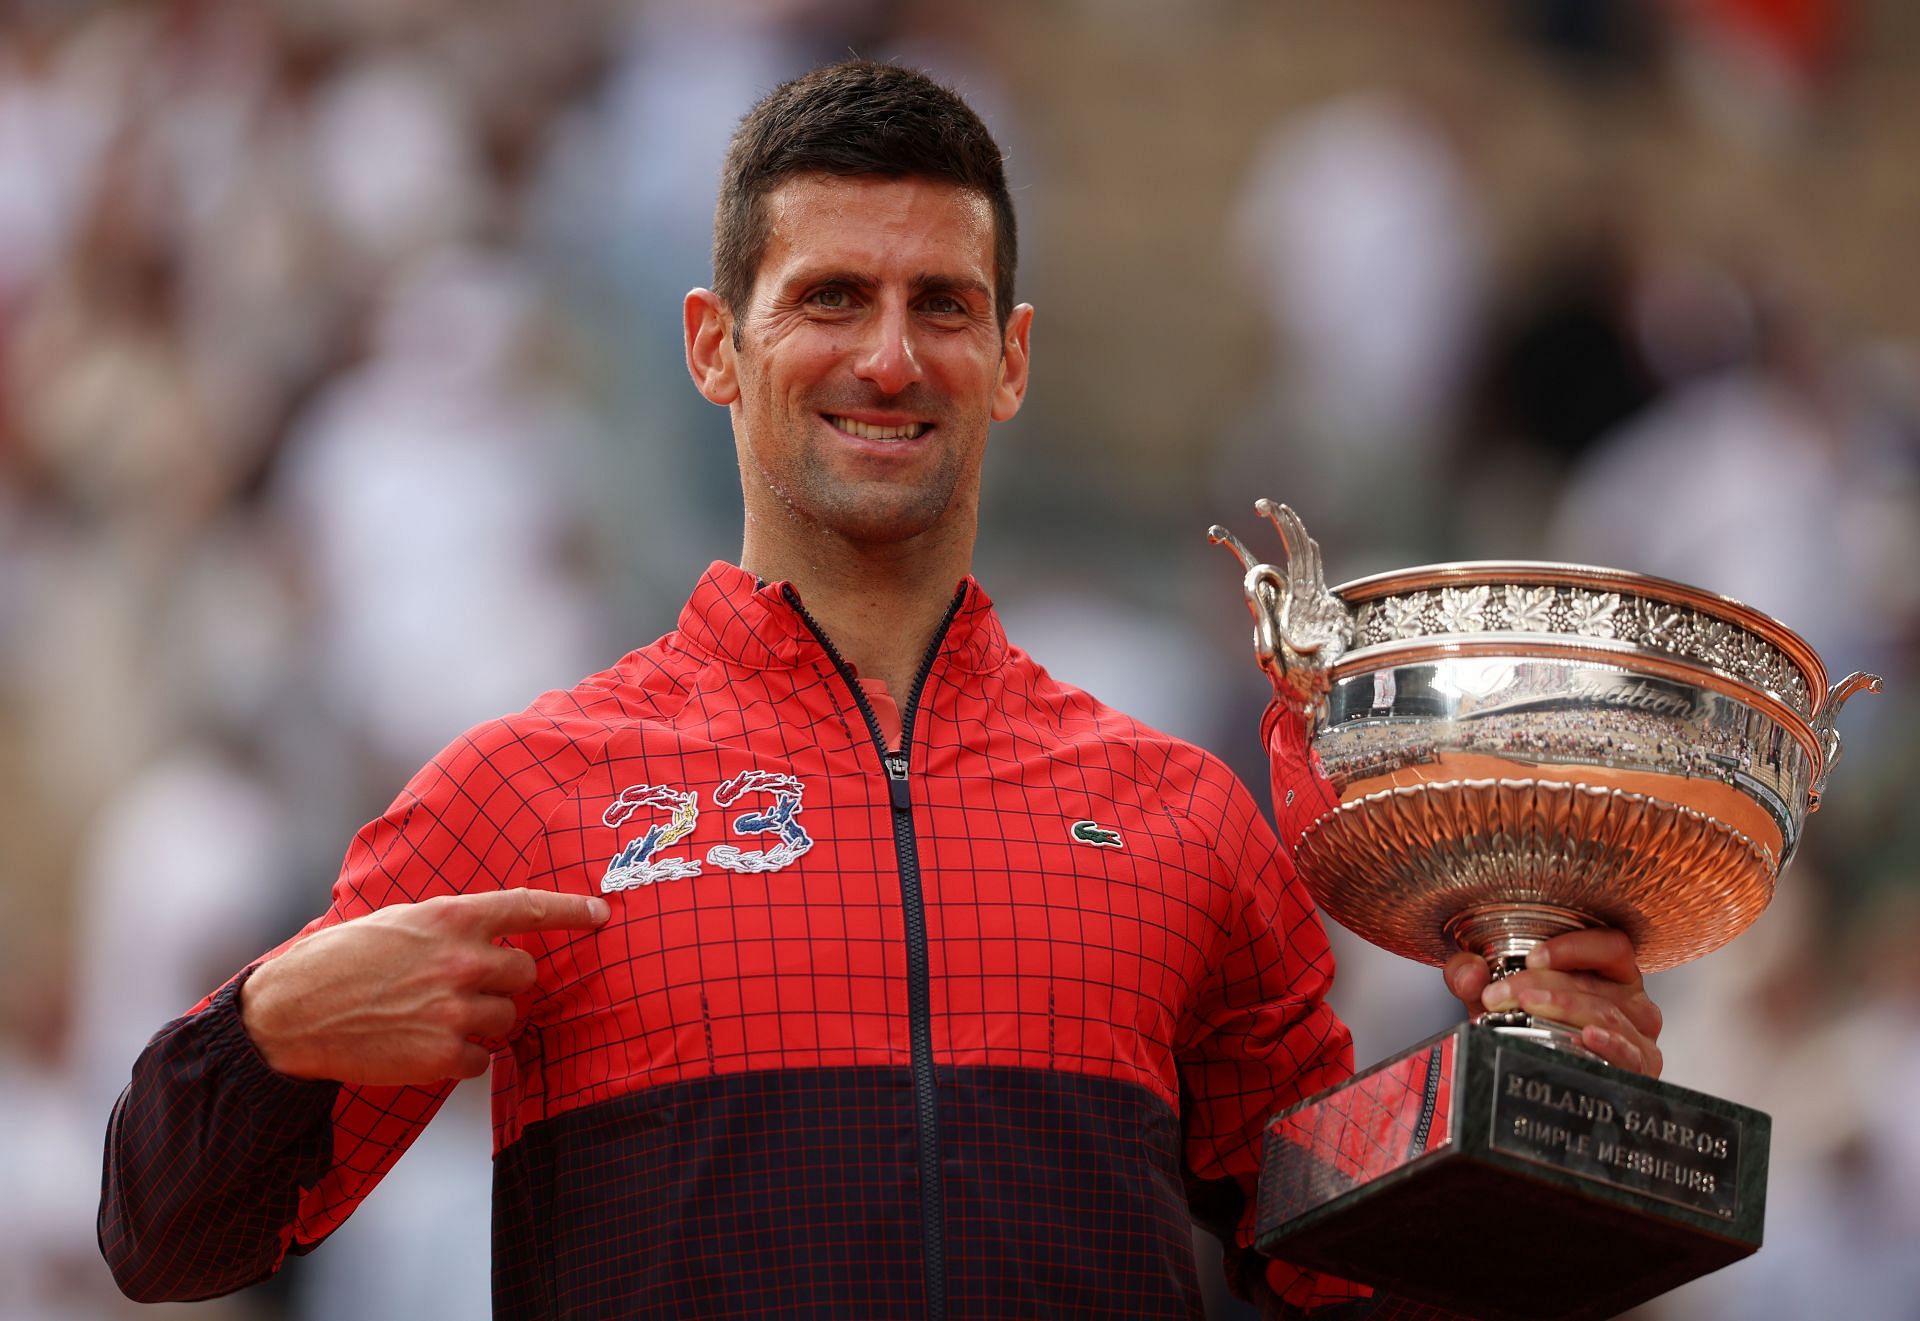 Djokovic poses with the trophy